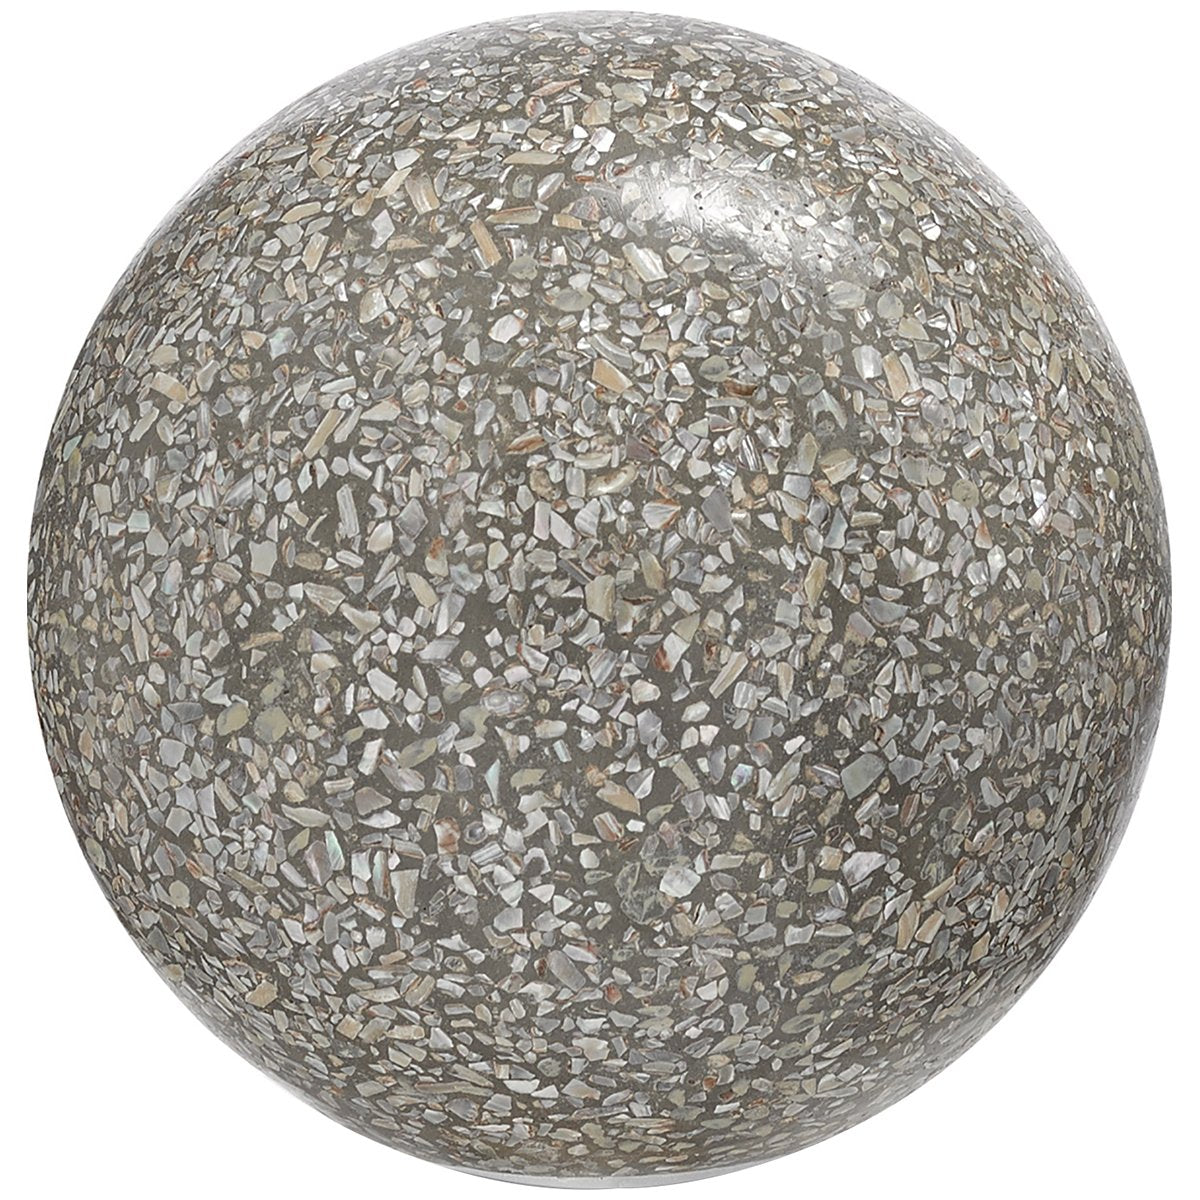 Currey and Company Abalone Concrete Ball